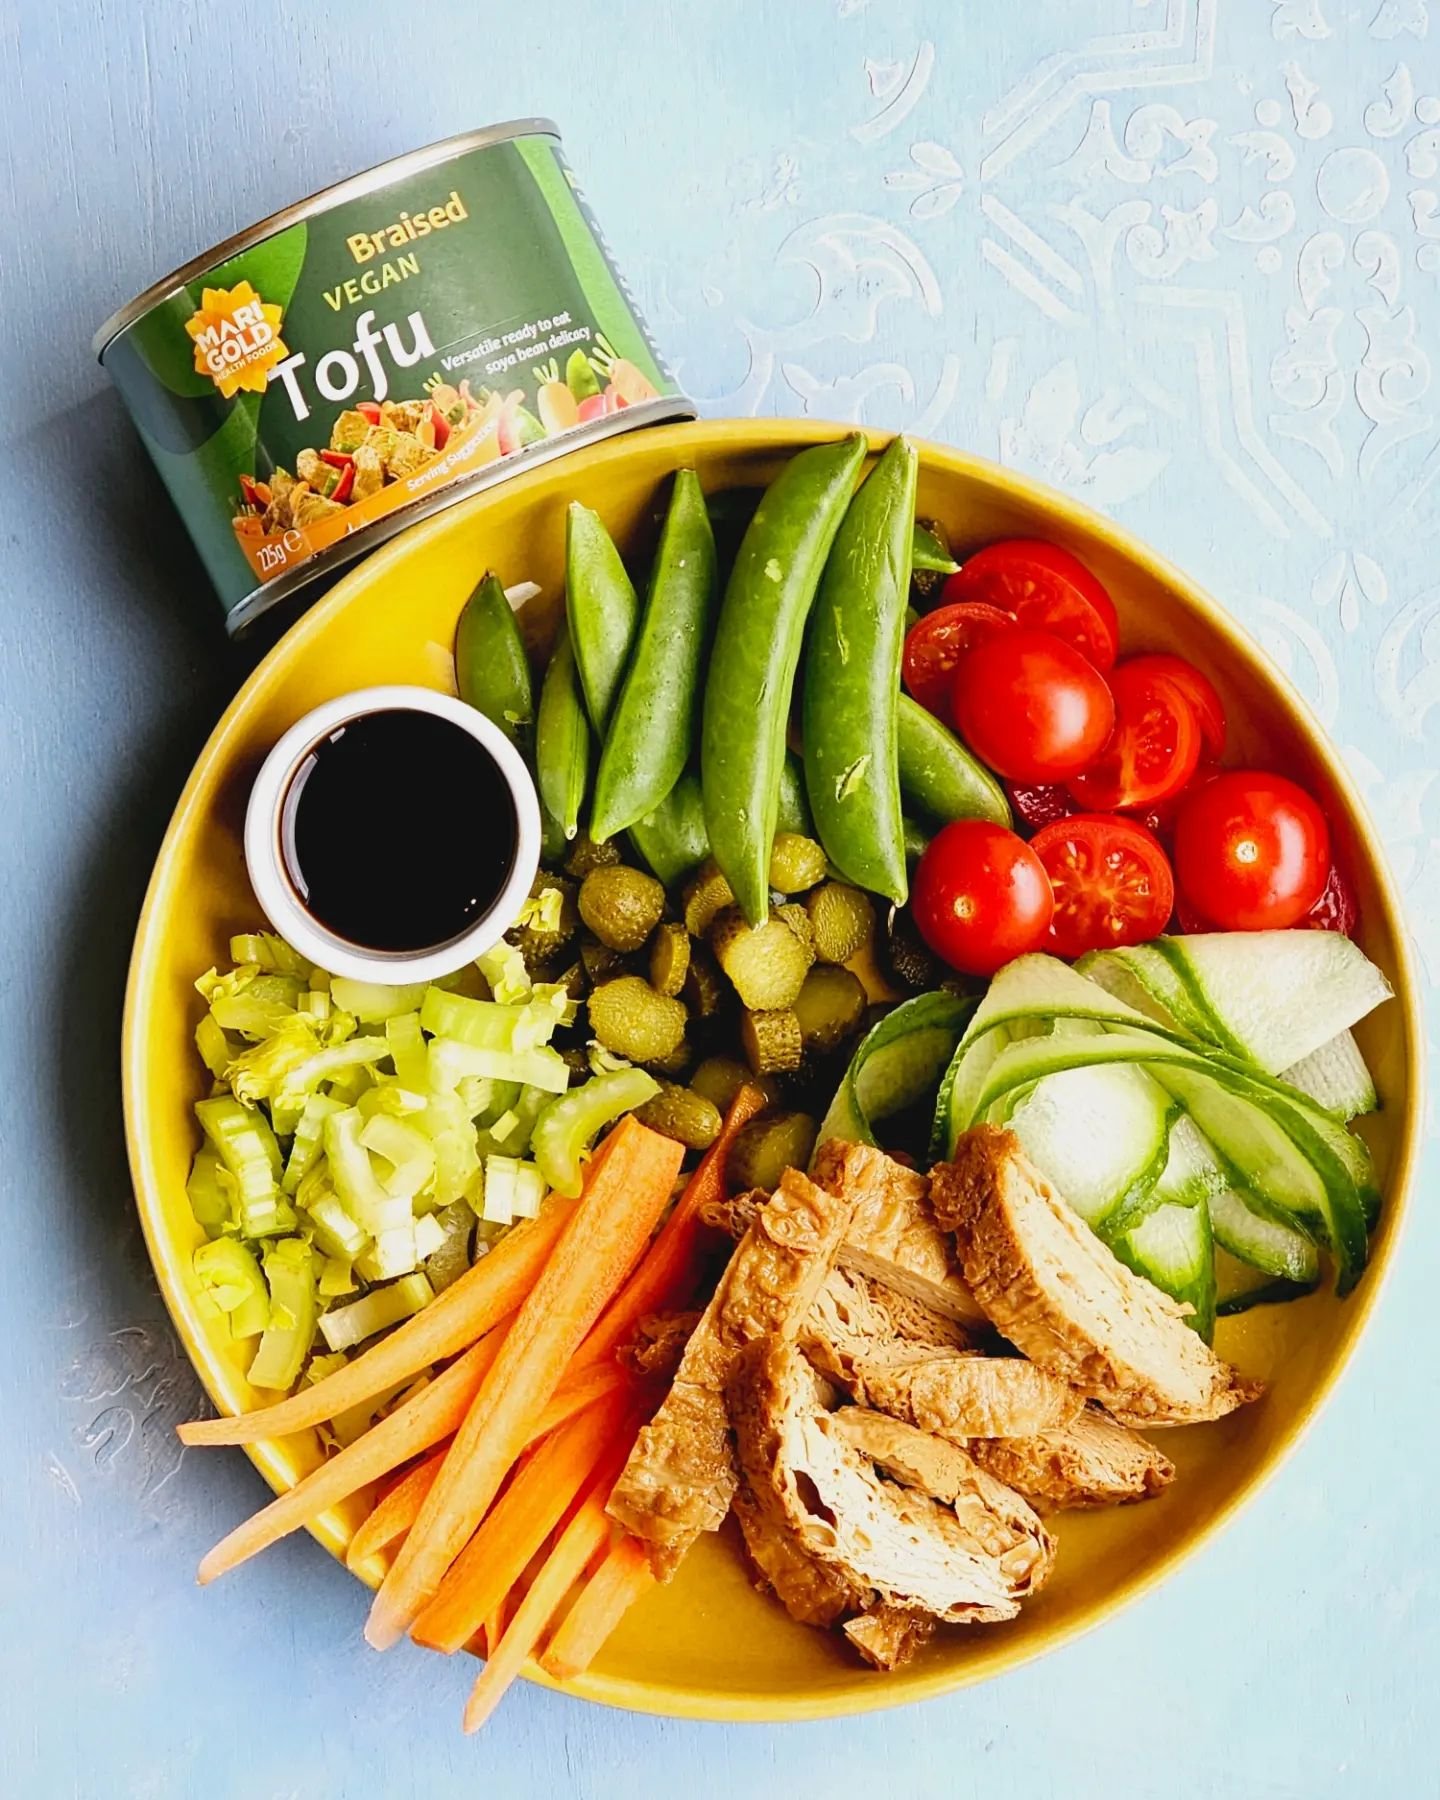 WIN some braised vegan tofu to help you make this delicious healthy Tofu Buddha Bowl - and some nooch &amp; bouillon too
😋
In case you haven't had the oppo to try our cans of tofu - here's the chance for one lucky winner. And if that's you - you'll 